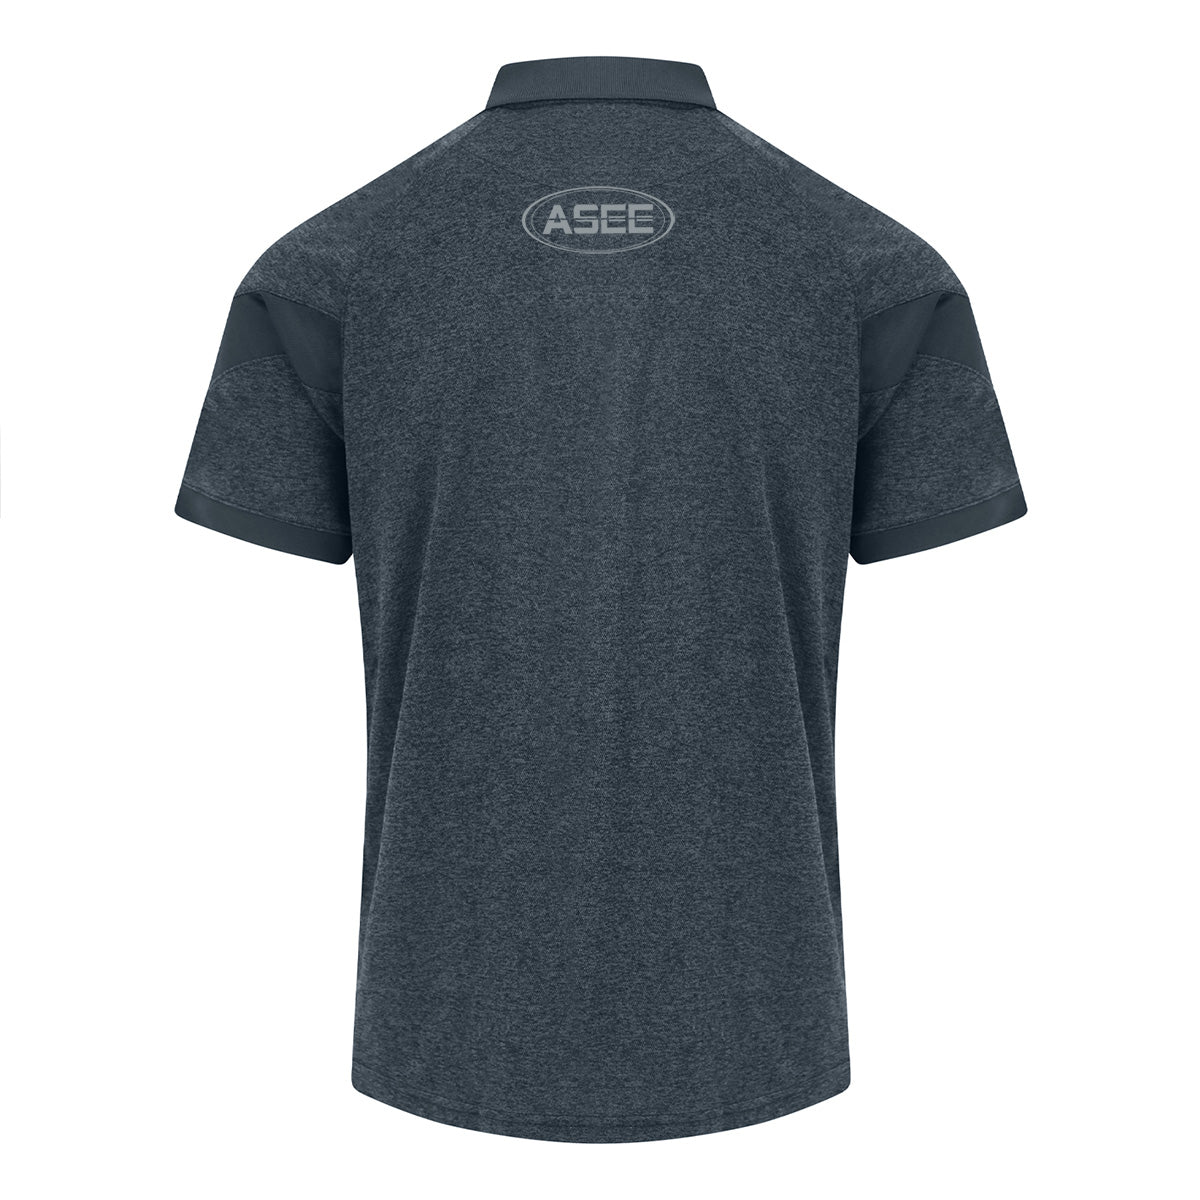 Mc Keever Armagh GAA Core 22 Polo Top - Adult - Charcoal